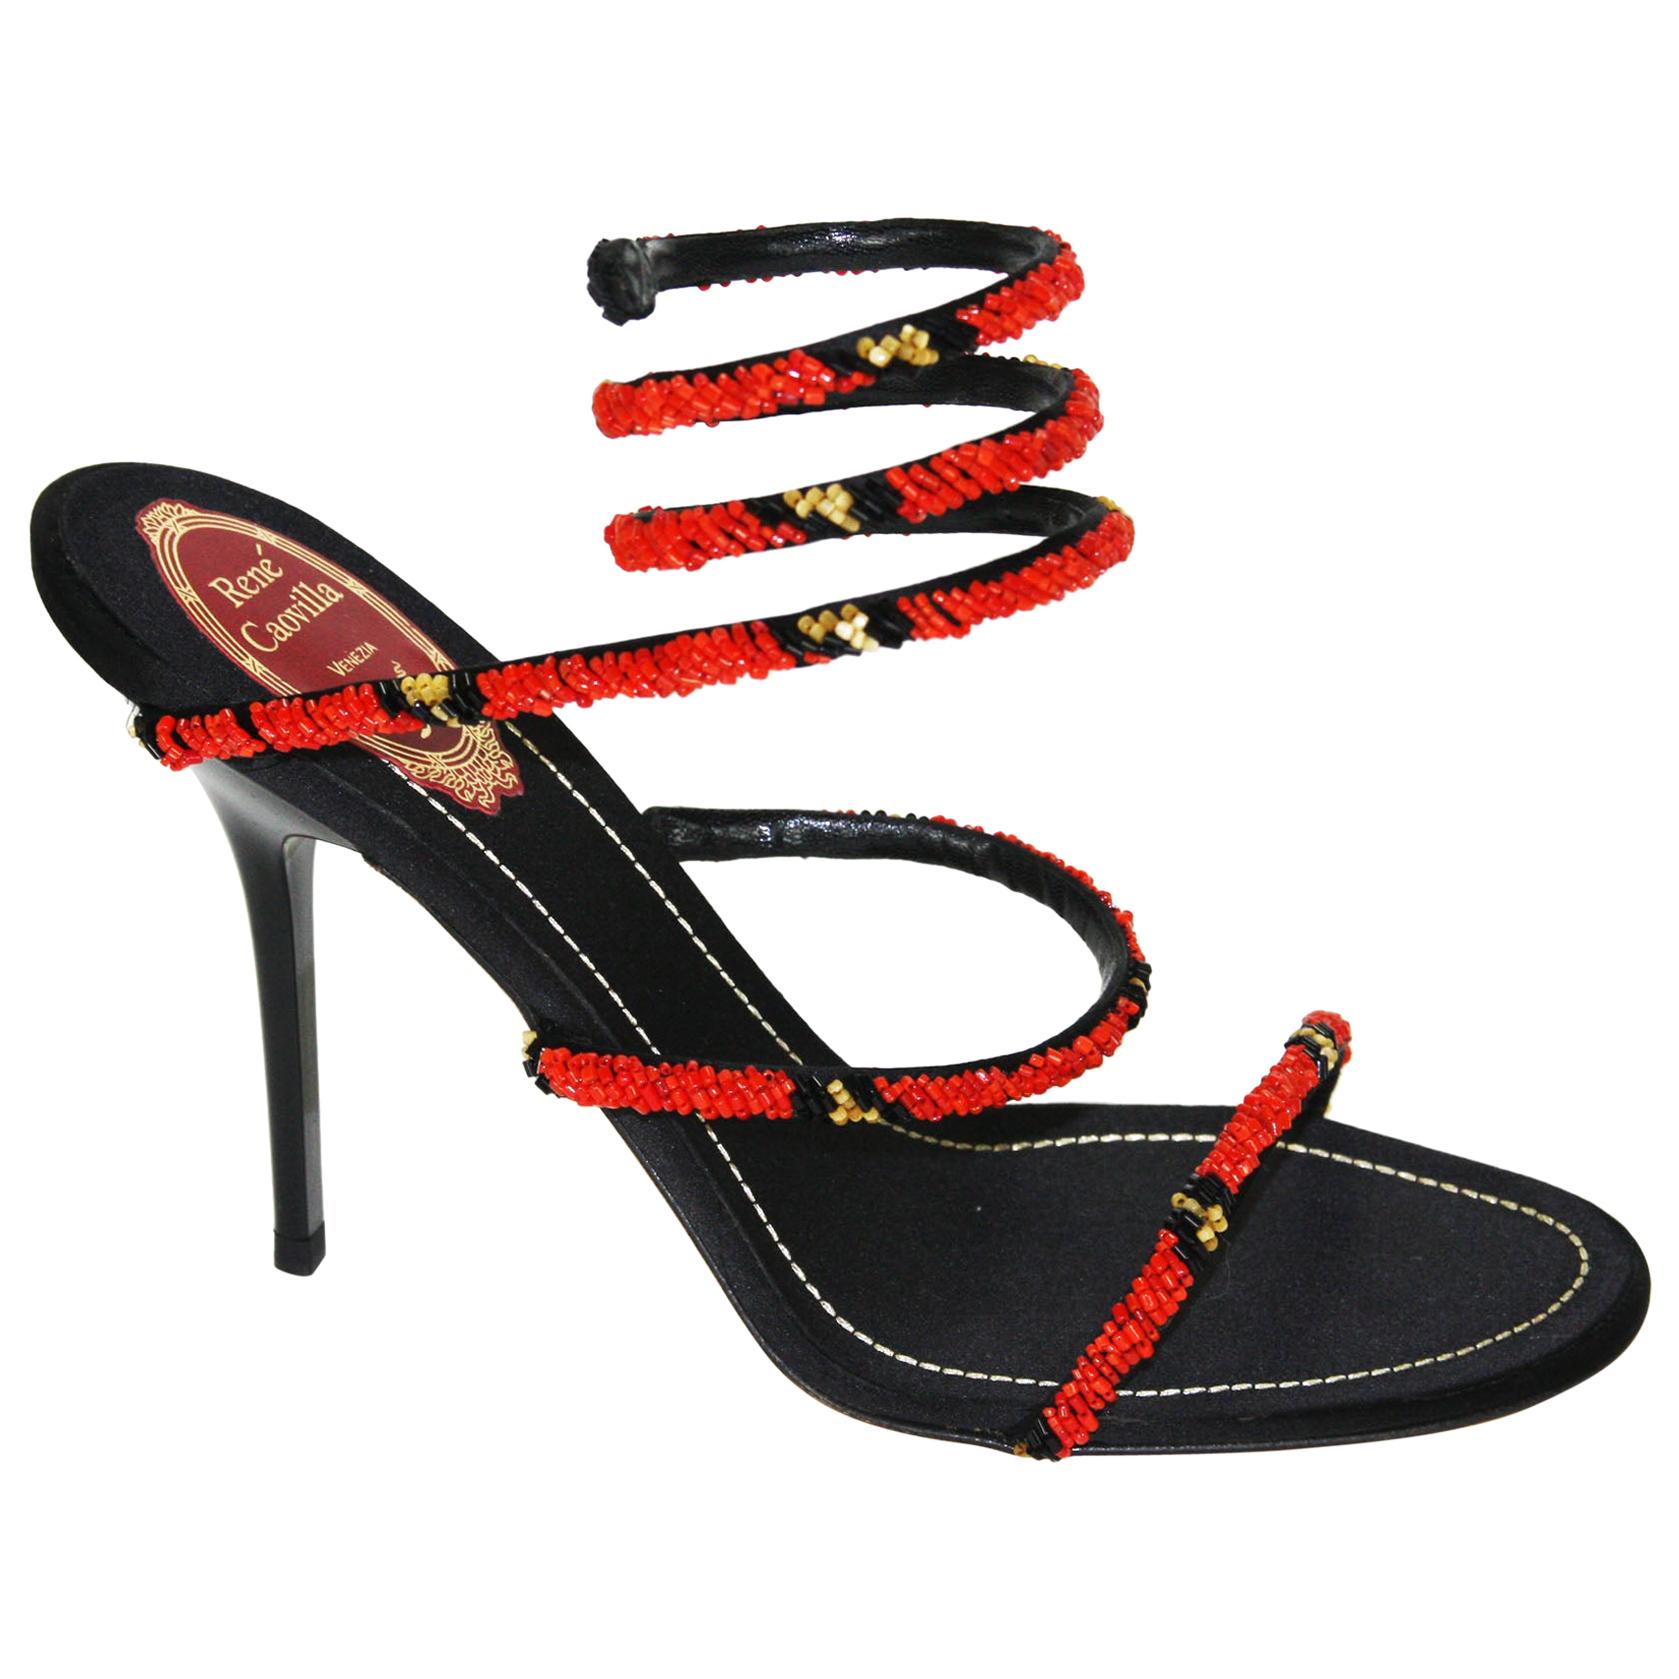 New Rene Caovilla Beaded Ankle-Wrap Black Red Shoes Sandals It. 39 - US 9